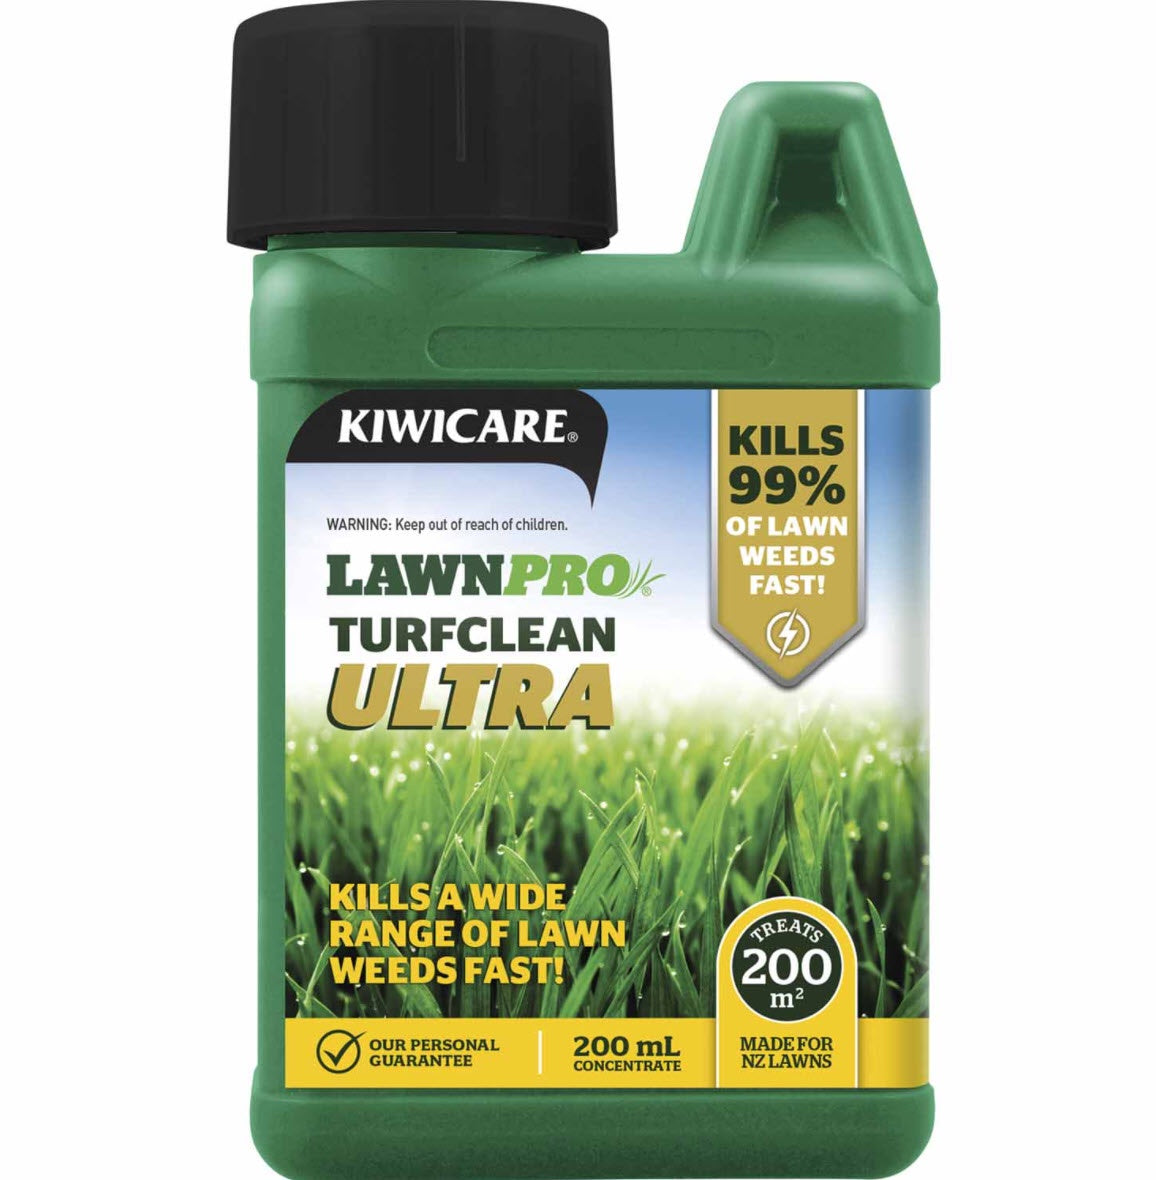 Kiwicare - LawnPro Turfclean ULTRA Concentrate (200ml)